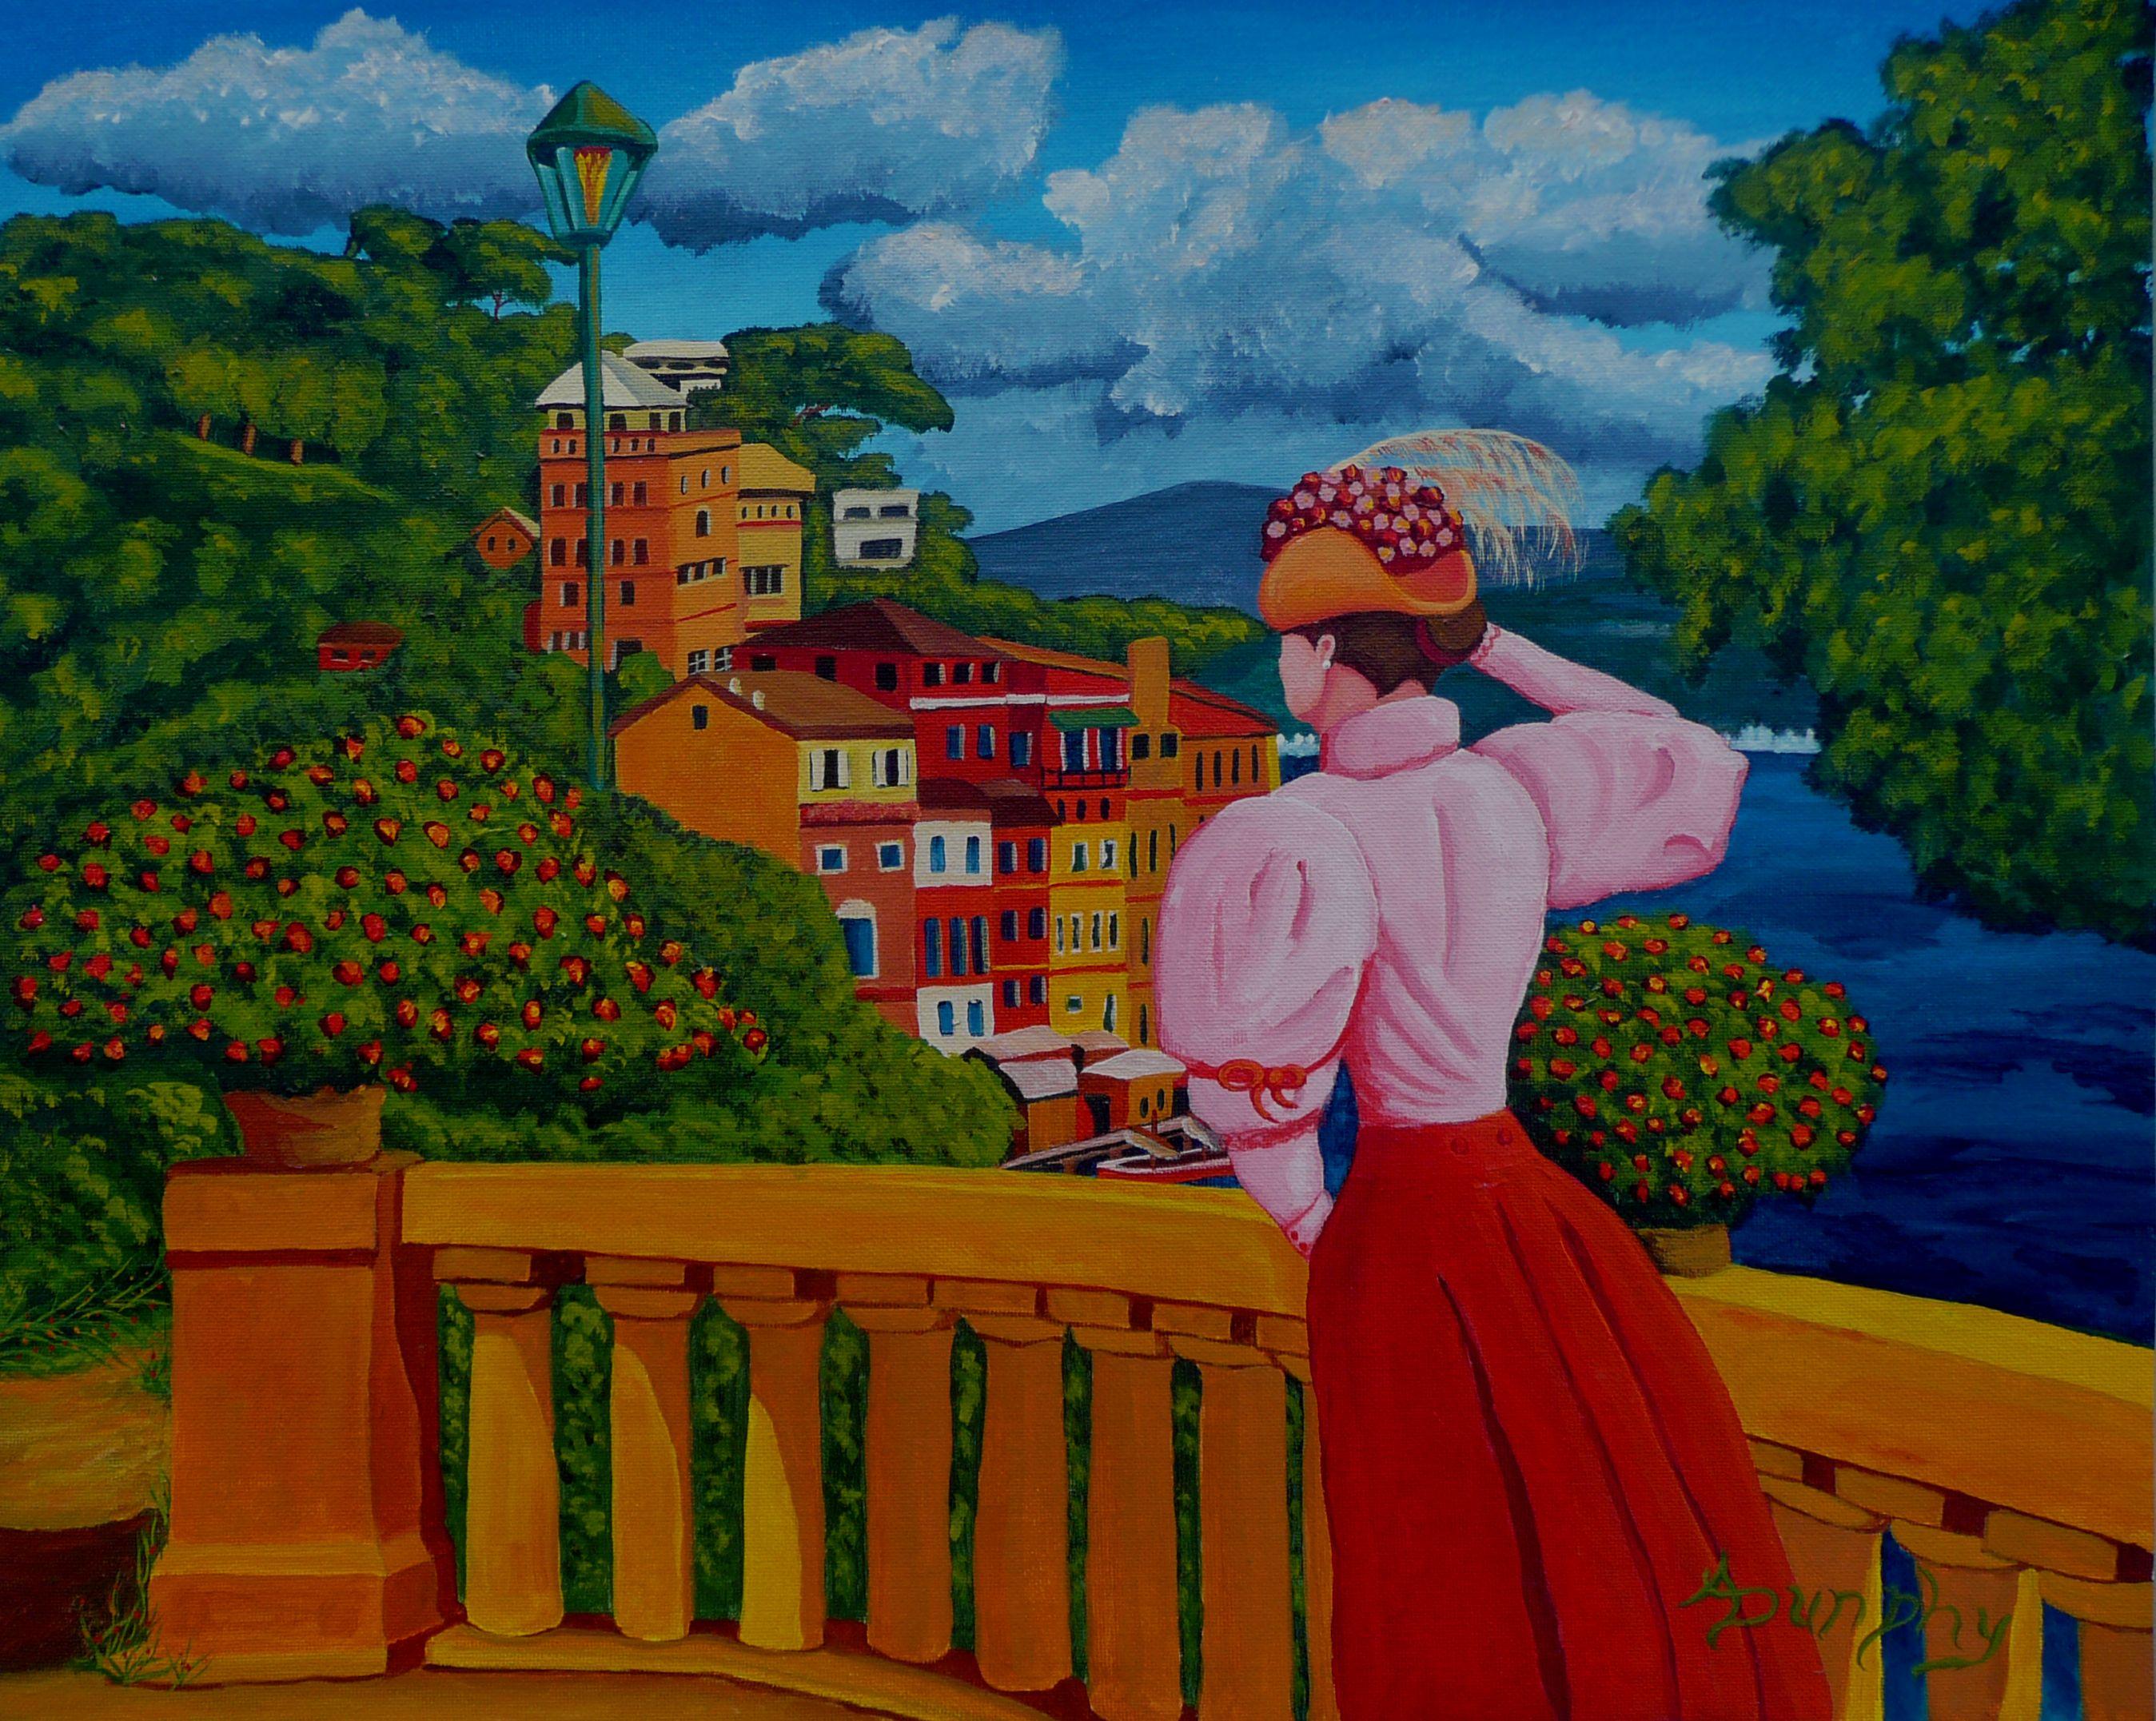 I love Italy! The buildings that crowd the sea in their beautiful array of colours are eye catching for me and I have to paint them.      A beautiful, young lady in Edwardian clothing stands on a balcony overlooking the colorful town of Portofino on